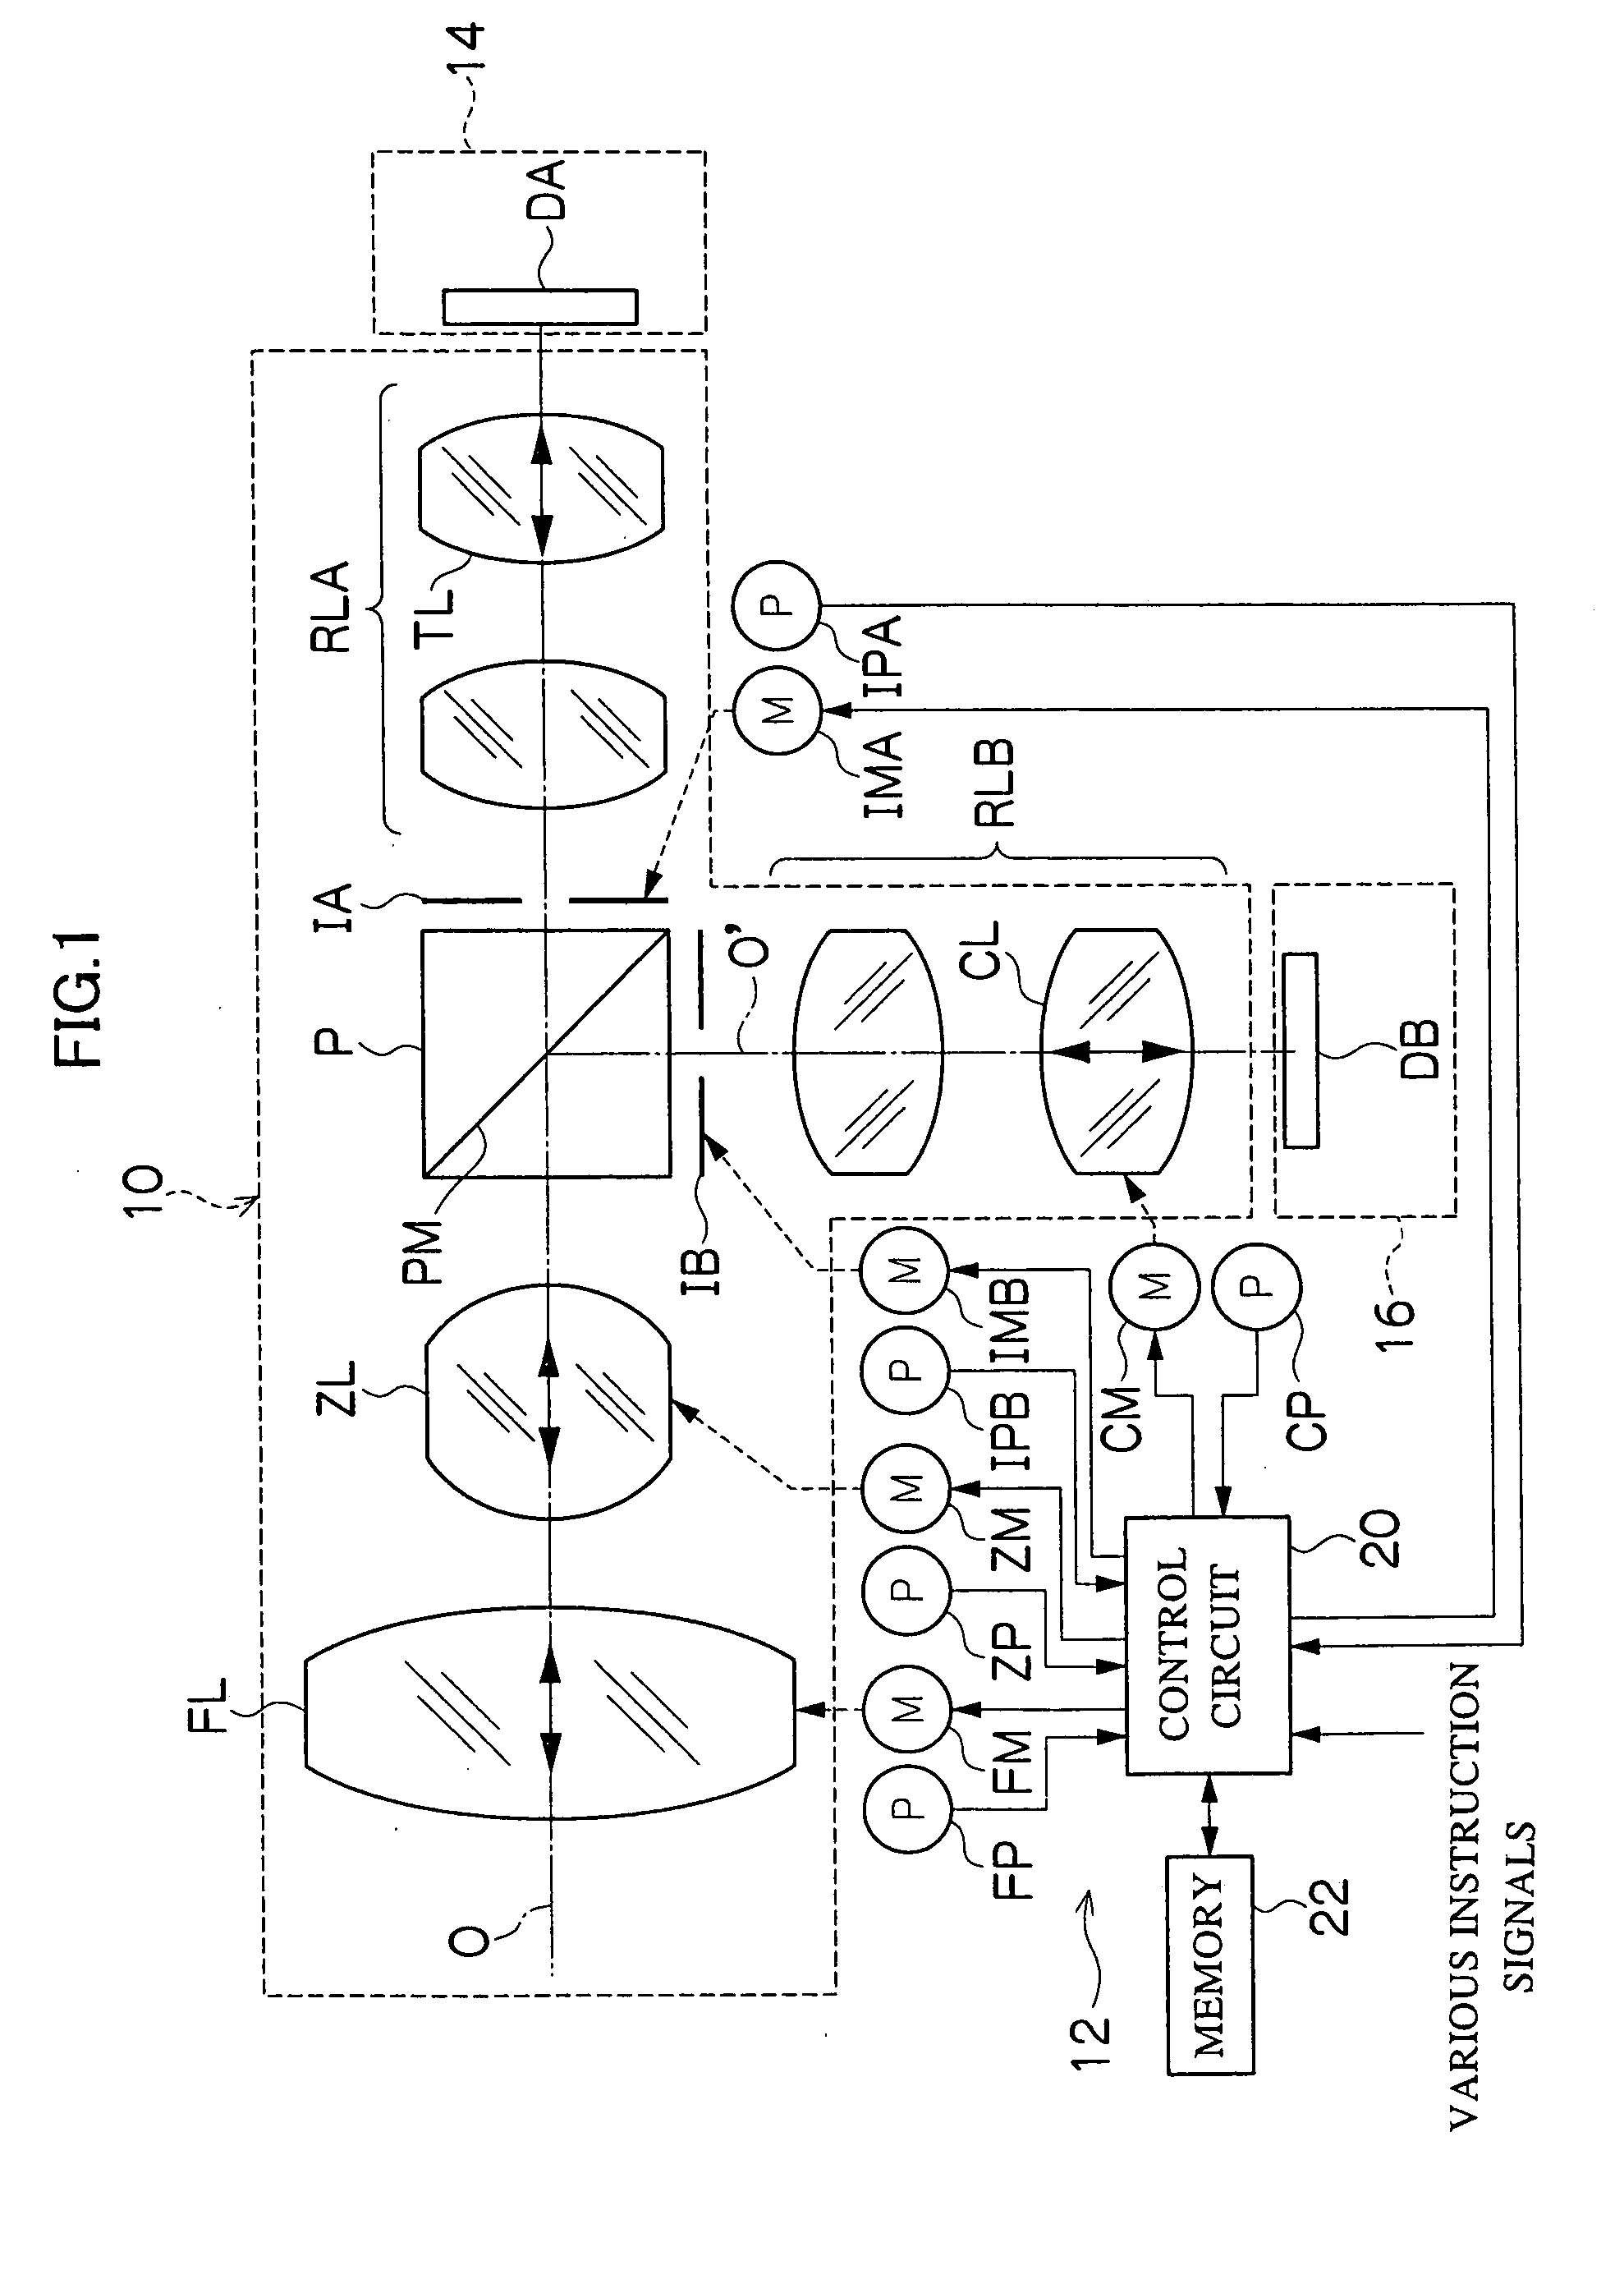 Visible and infrared light photographing lens system